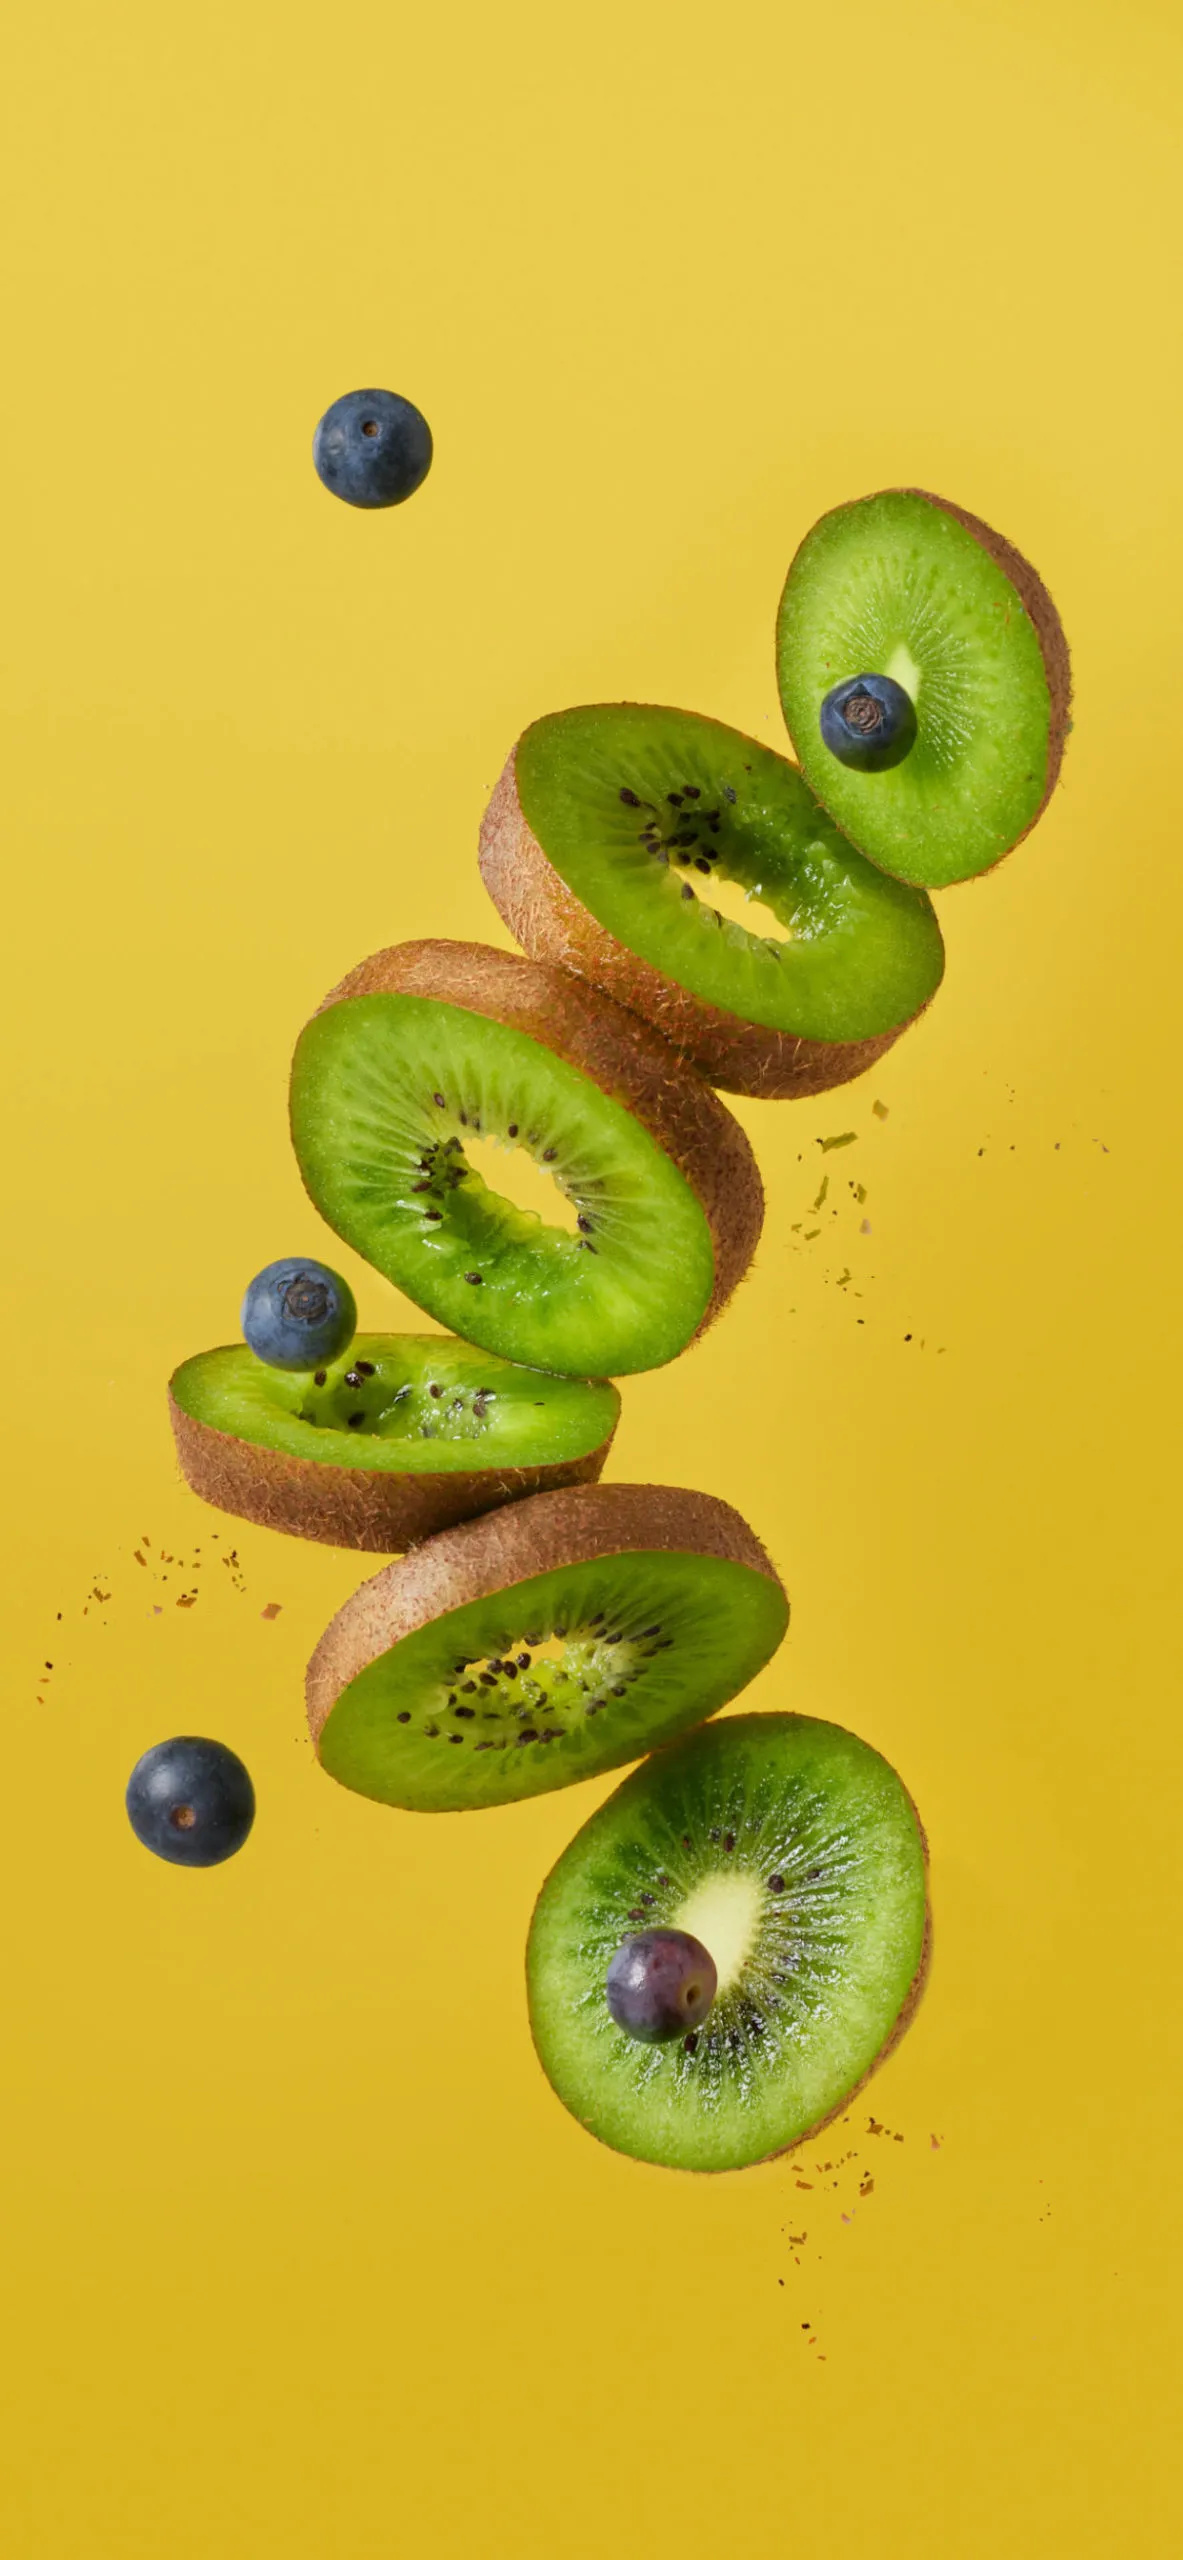 Fruits wallpaper iPhone, High quality image, Vibrant and fresh, Stunning visual, 1190x2560 HD Phone